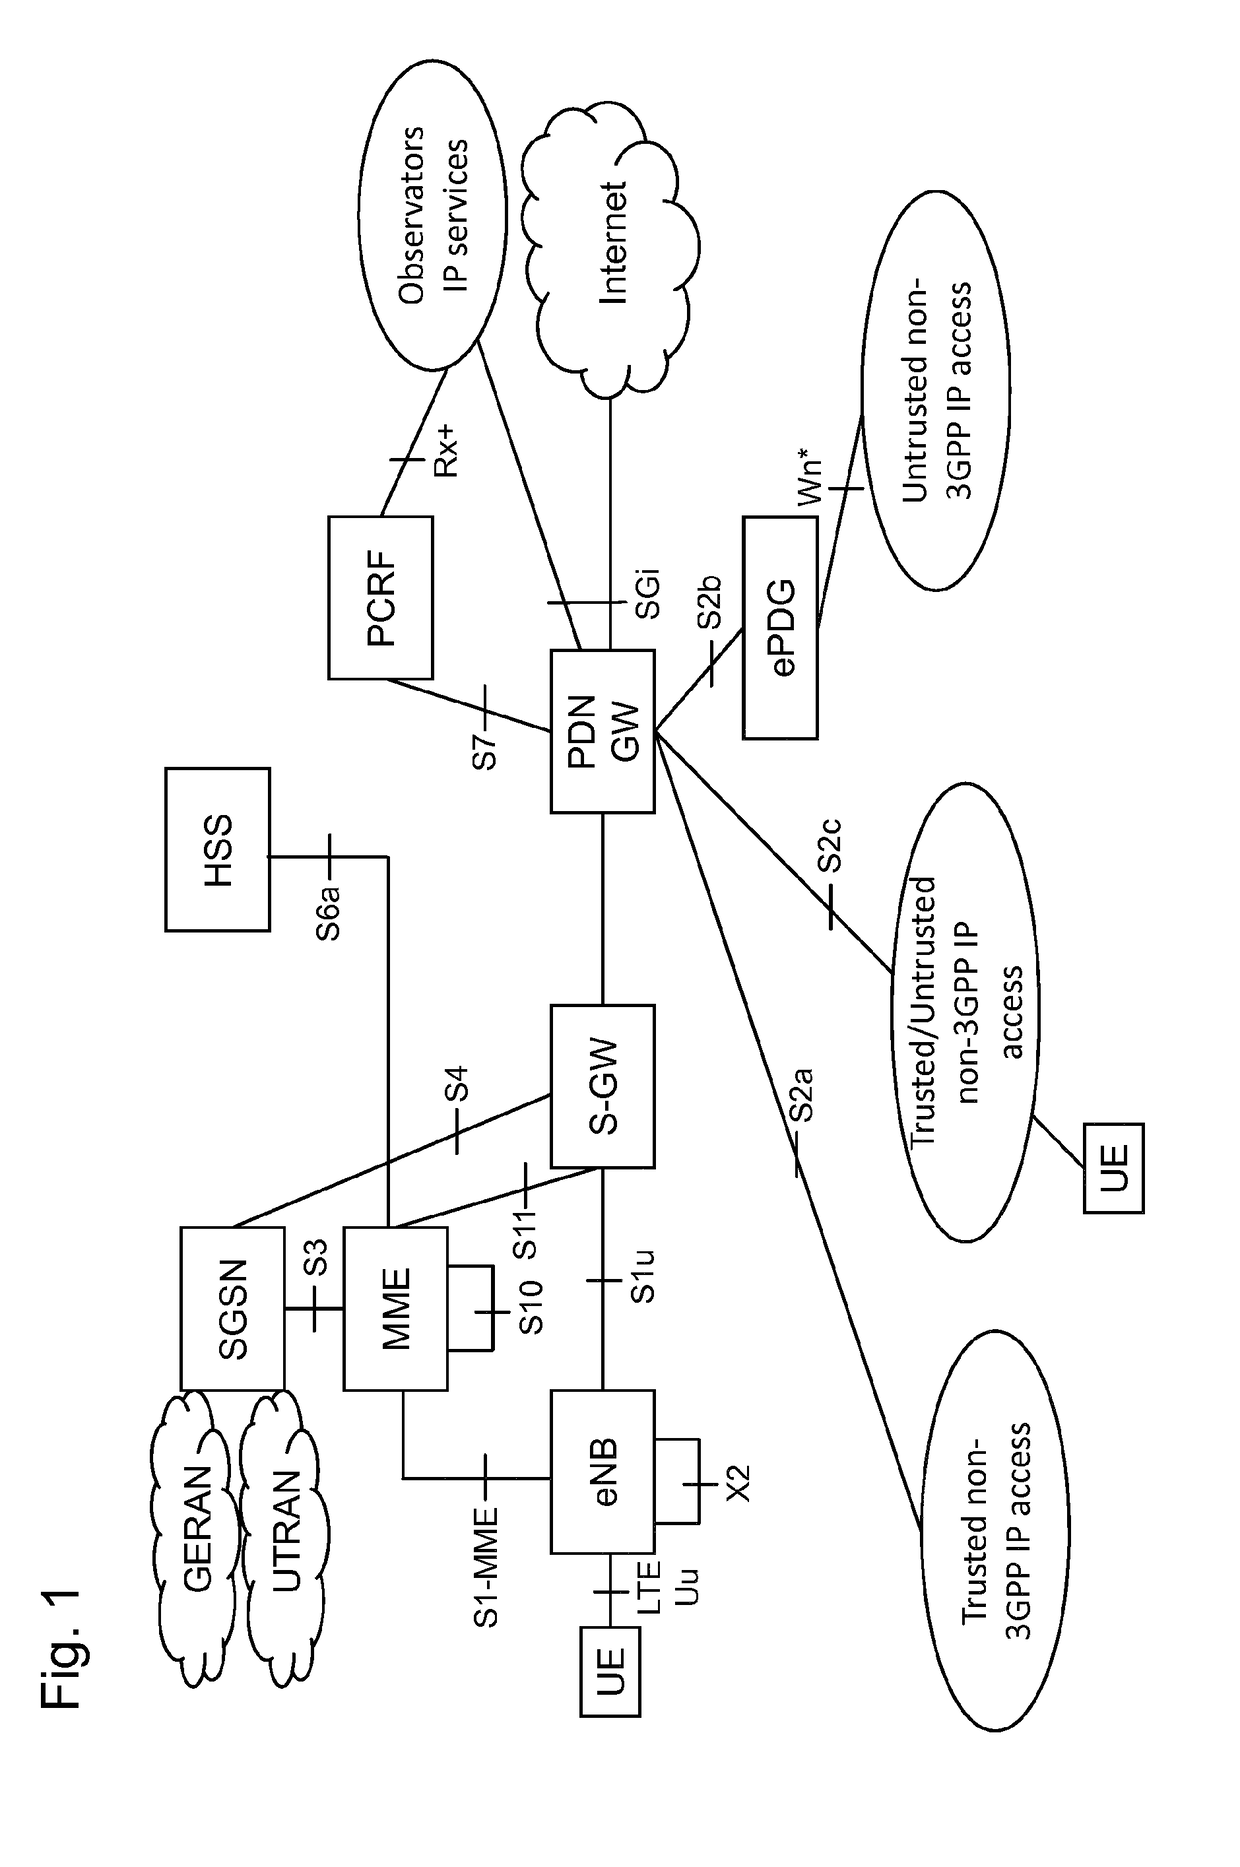 Synchronization for LTE licensed assisted access in unlicensed bands